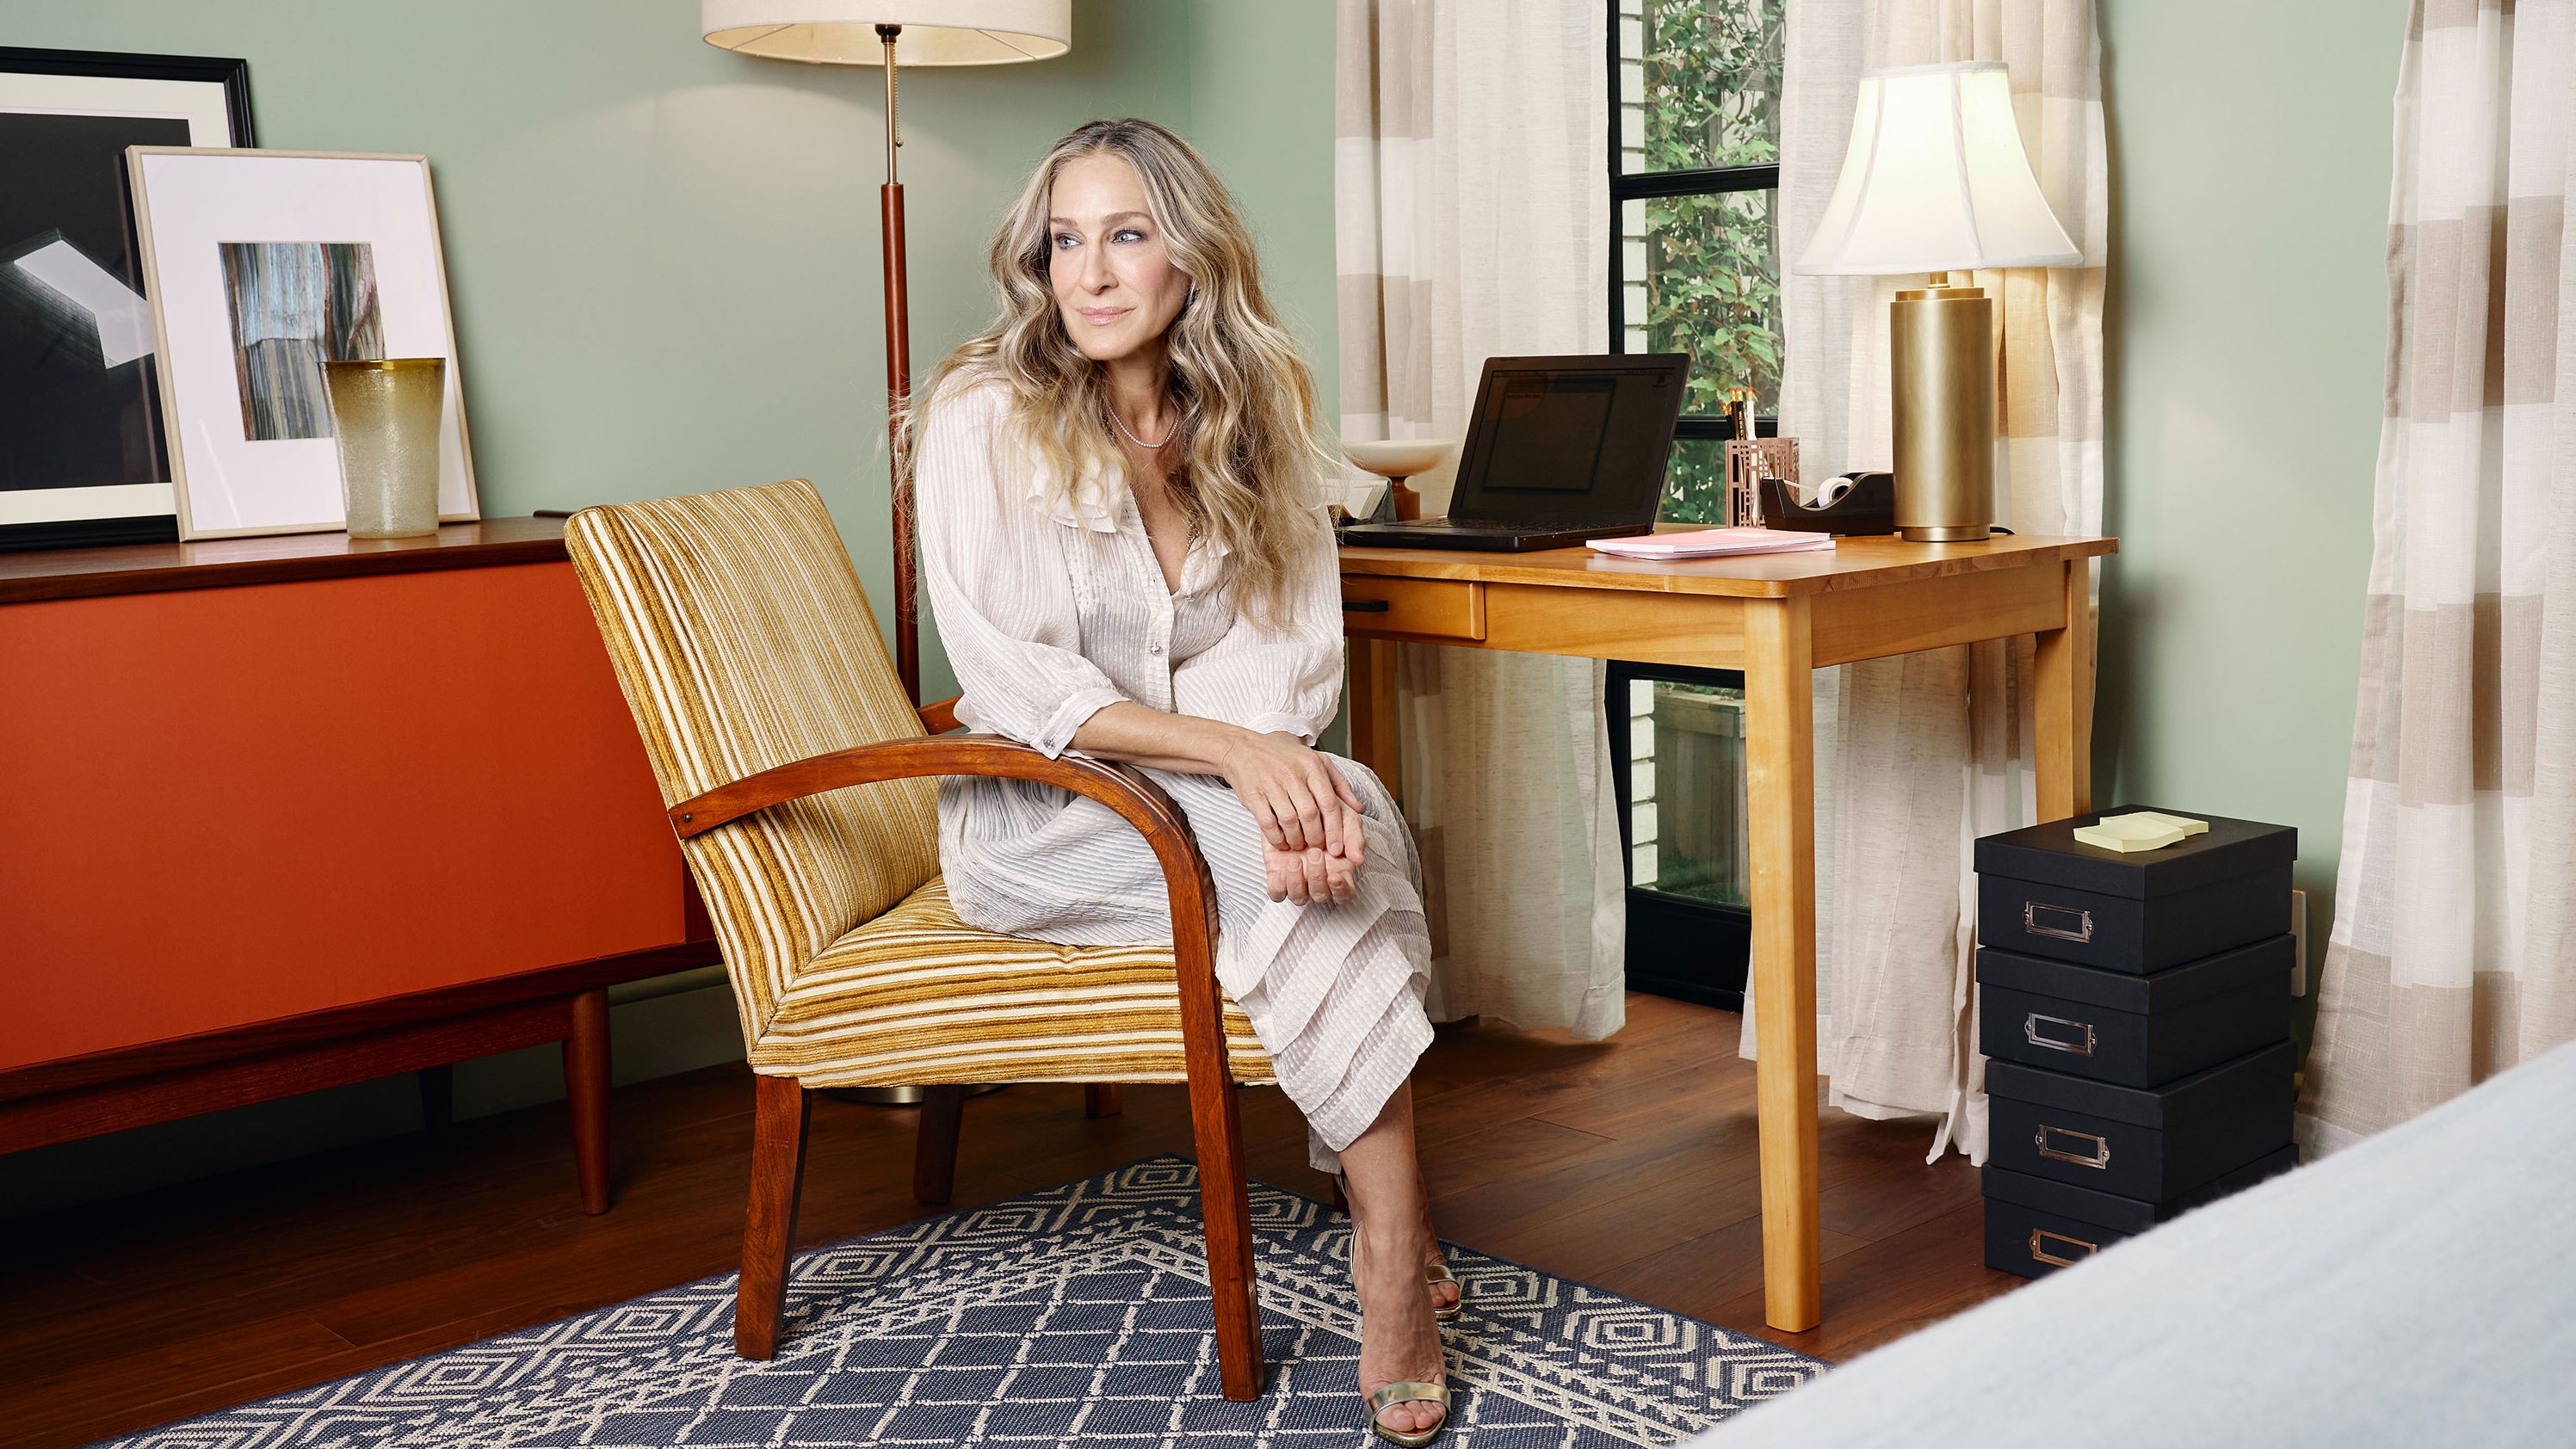 At Airbnb's recreation of Carrie's brownstone from "Sex and the City," Sarah Jessica Parker will virtually greet guests in the style of one of Carrie's monologues. 